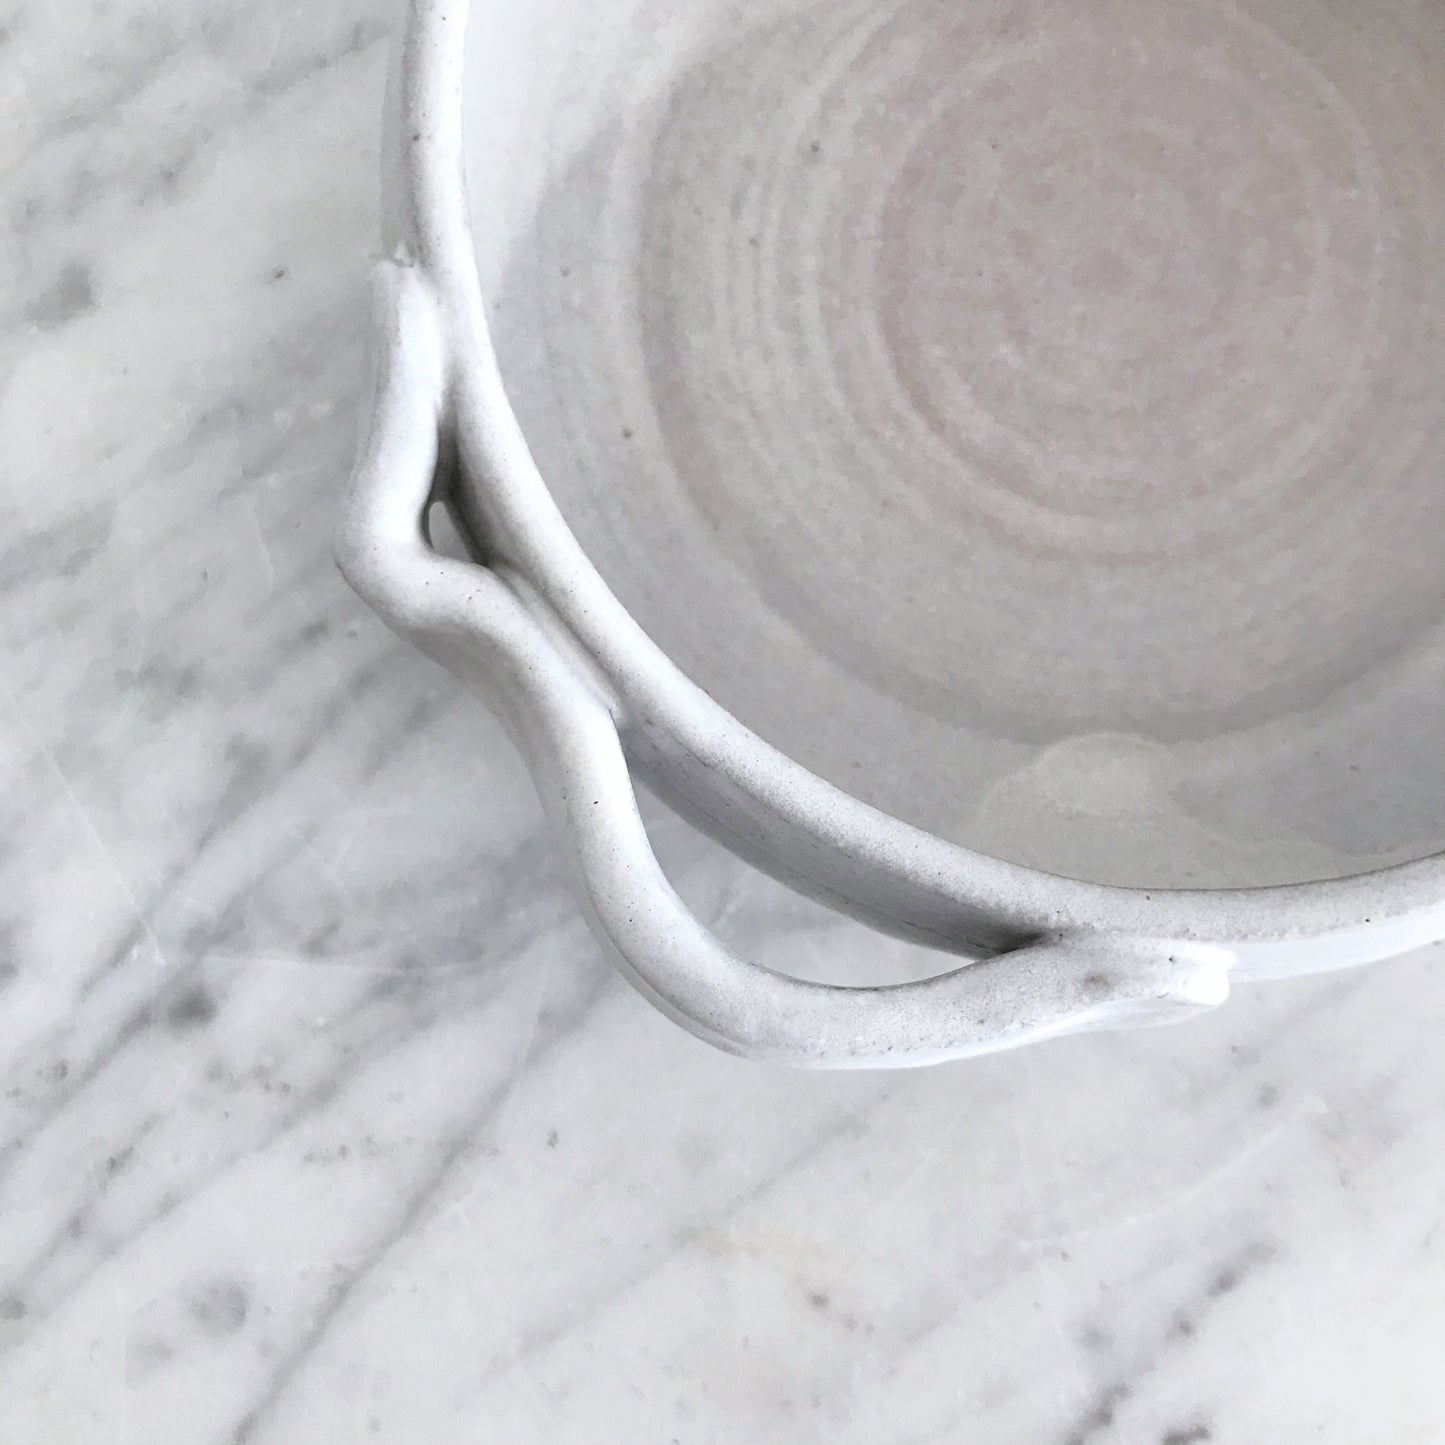 Handcrafted Soft Gray Pottery Dish